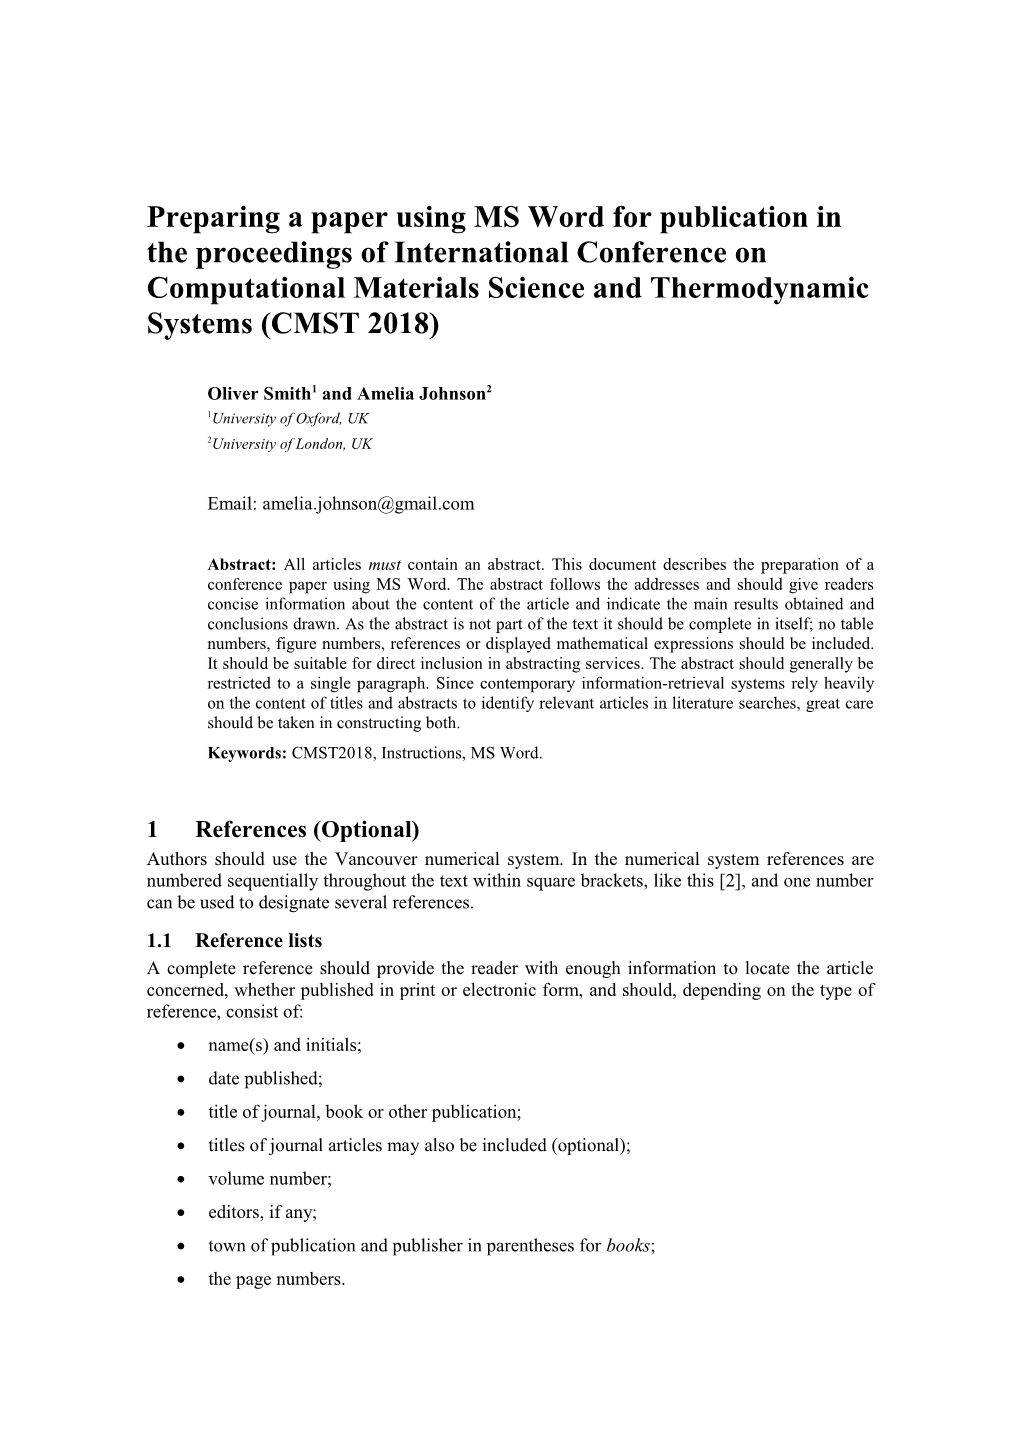 Preparing a Paper Using MS Word for Publication in the Proceedings of International Conference